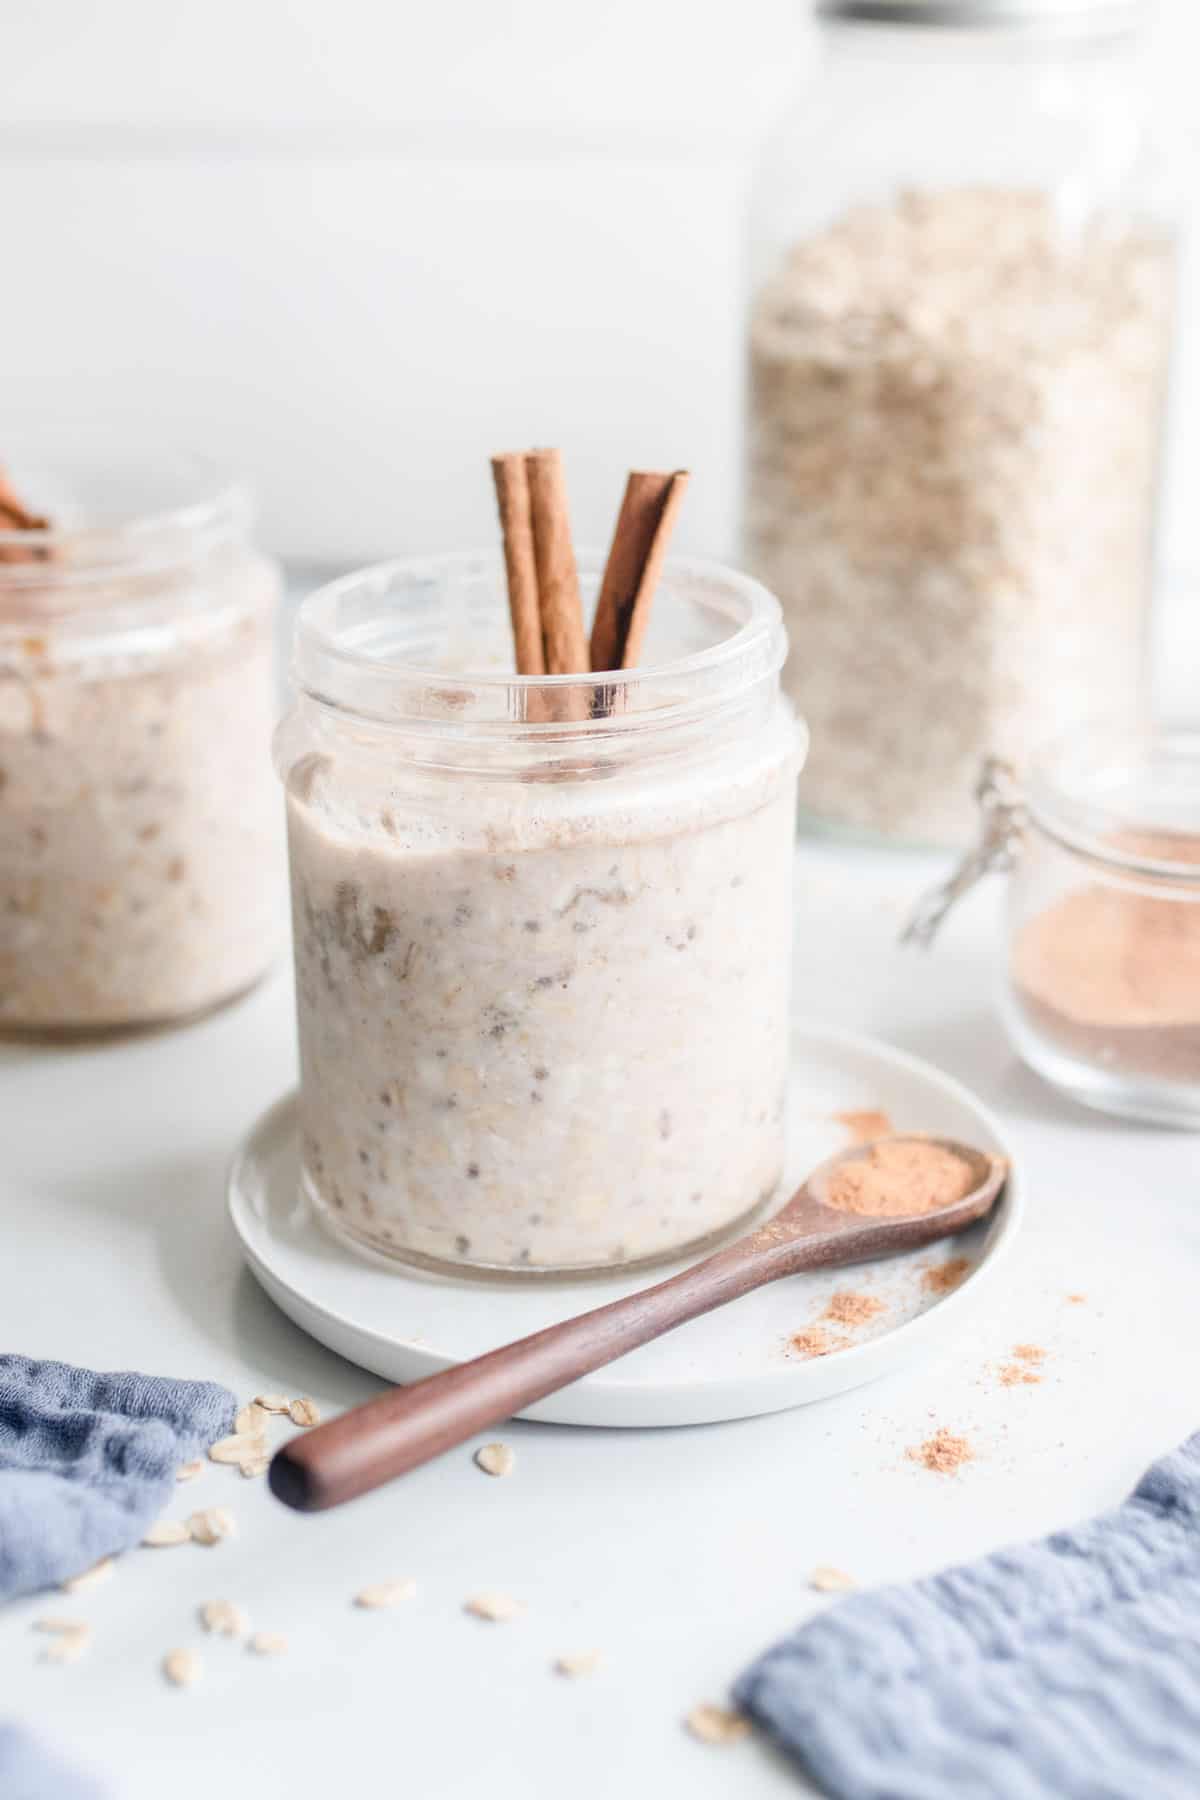 A jar of overnight oats next to a jar of raw oats, with a spoonful of cinnamon sitting in front.